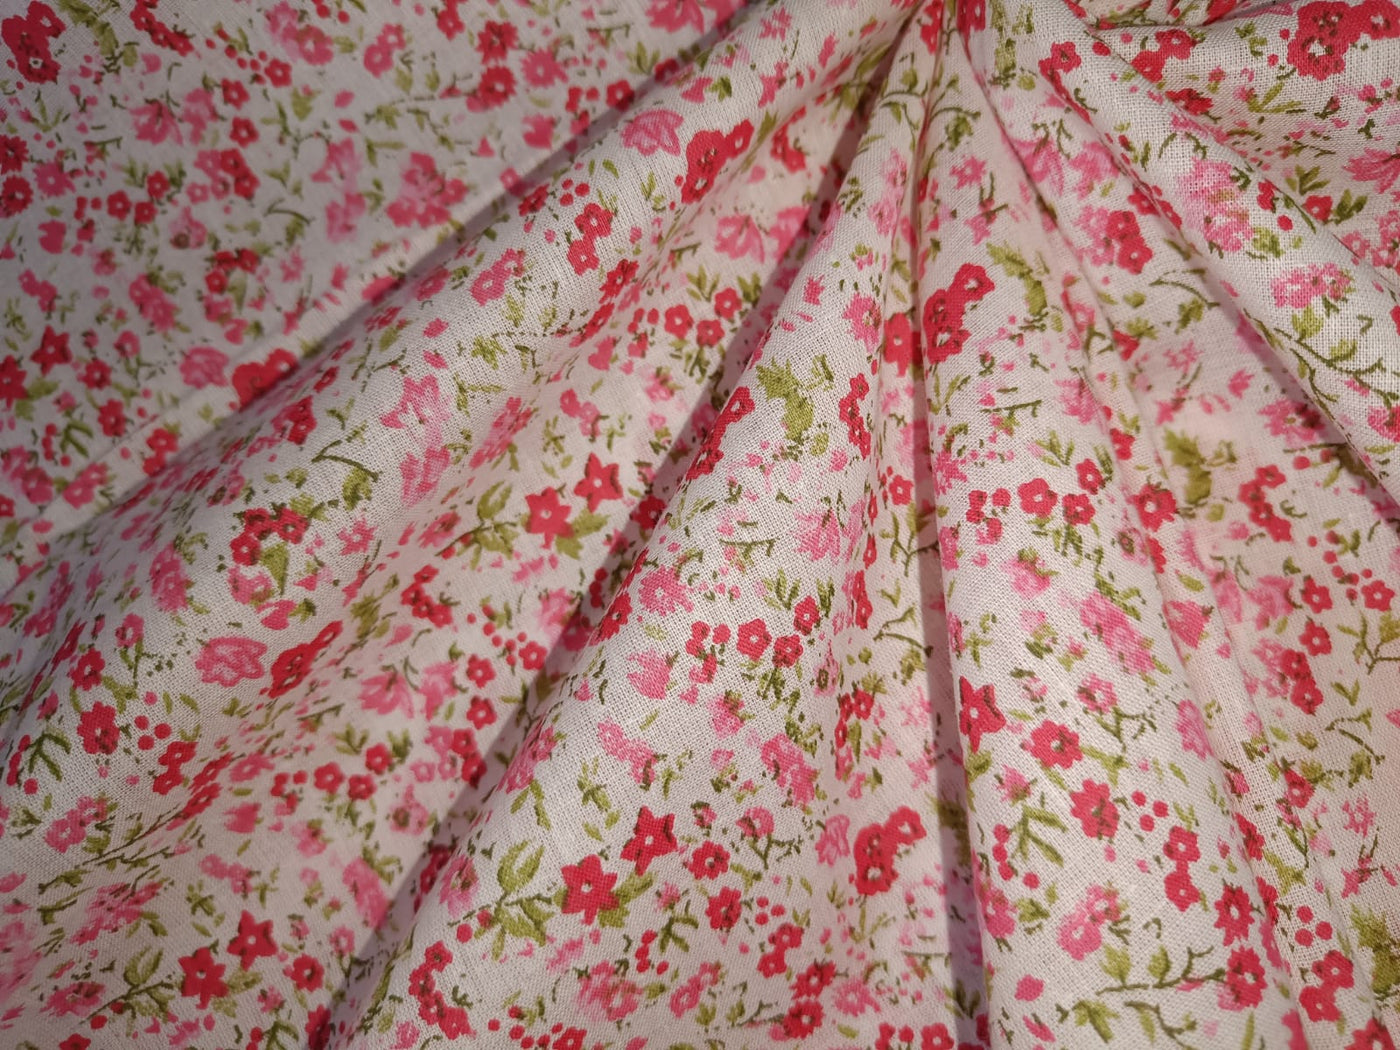 100% cotton mull fabric floral print 44" wide available in 3 colors pink, grey, blue